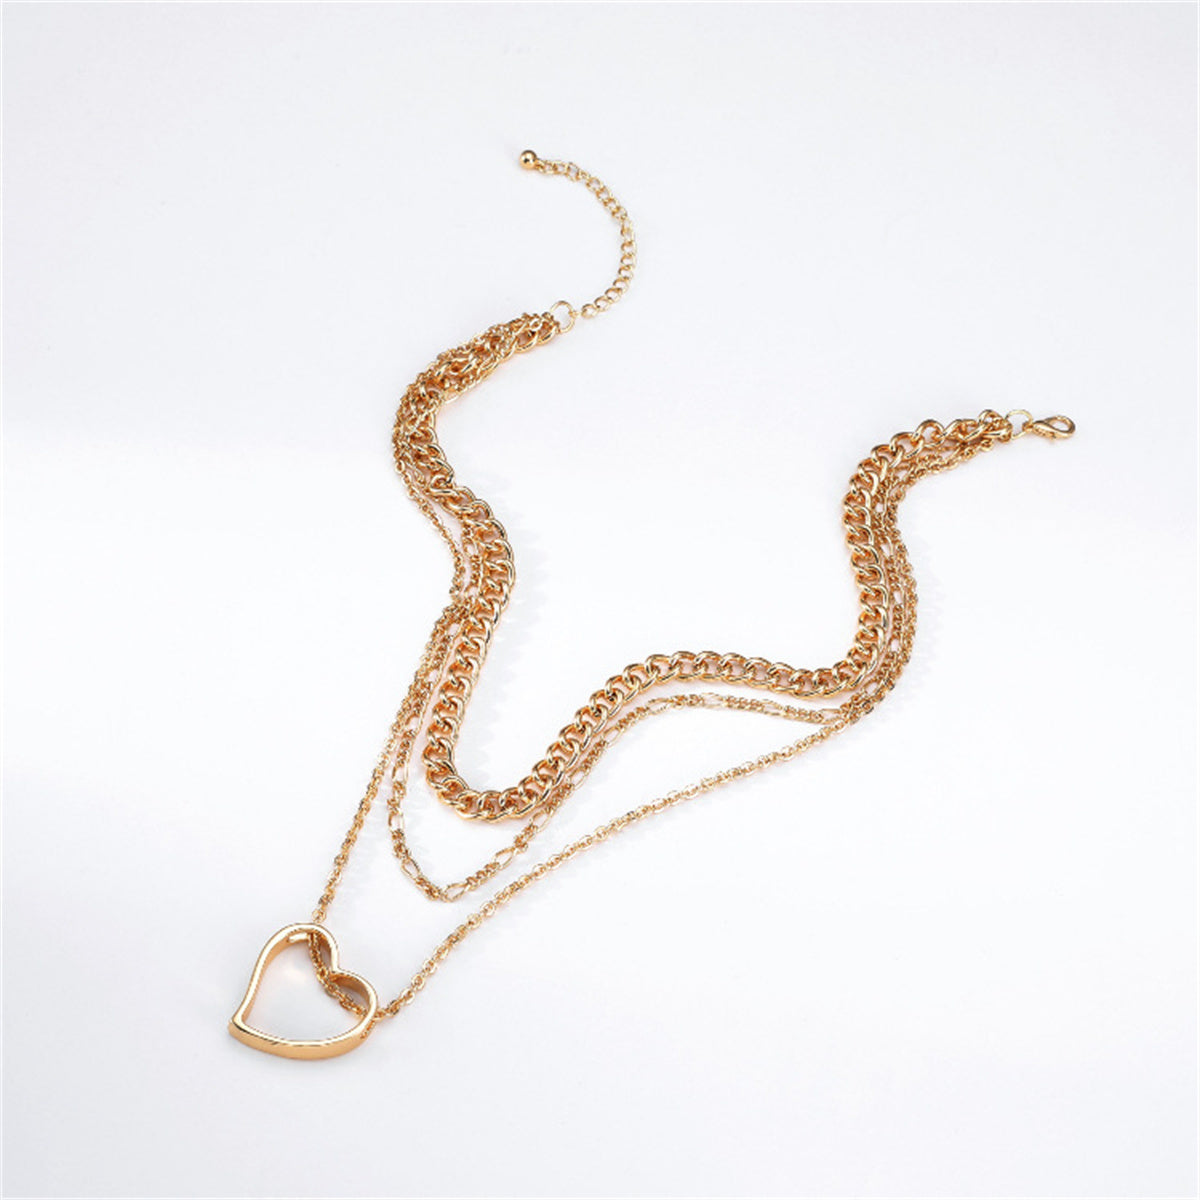 18K Gold-Plated Openwork Heart Pendant Layered Necklace